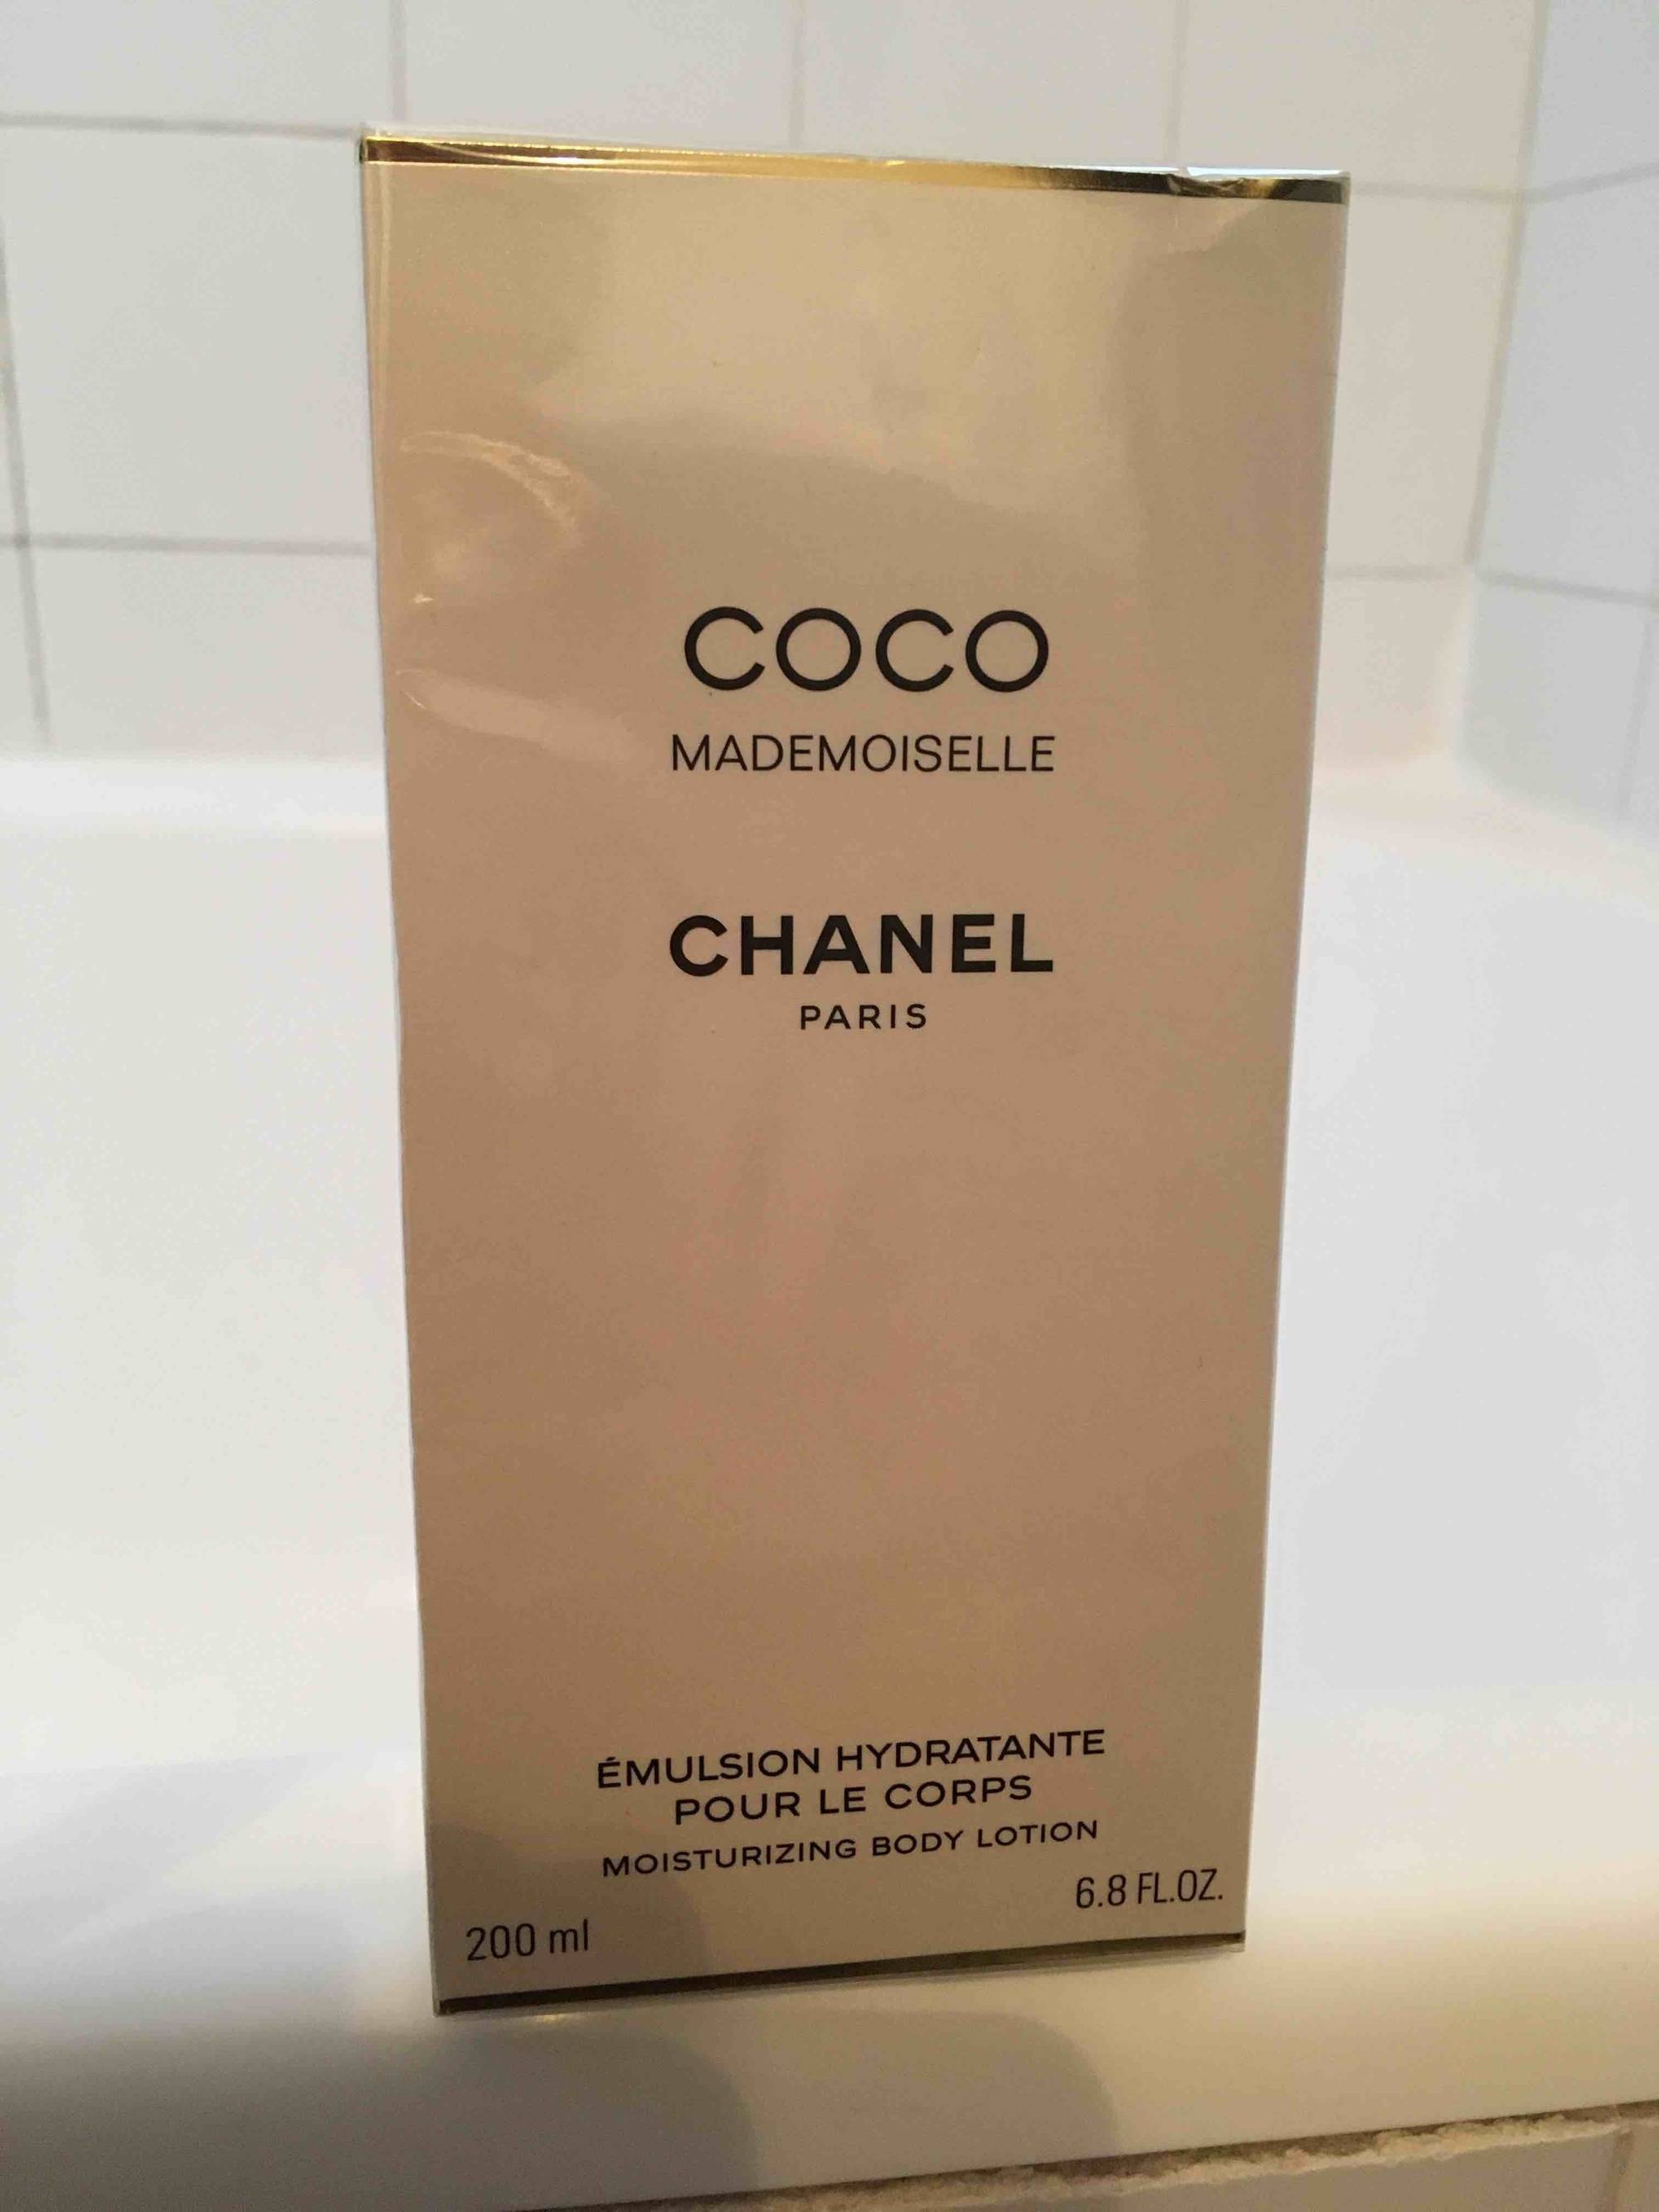 CHANEL - Coco mademoiselle